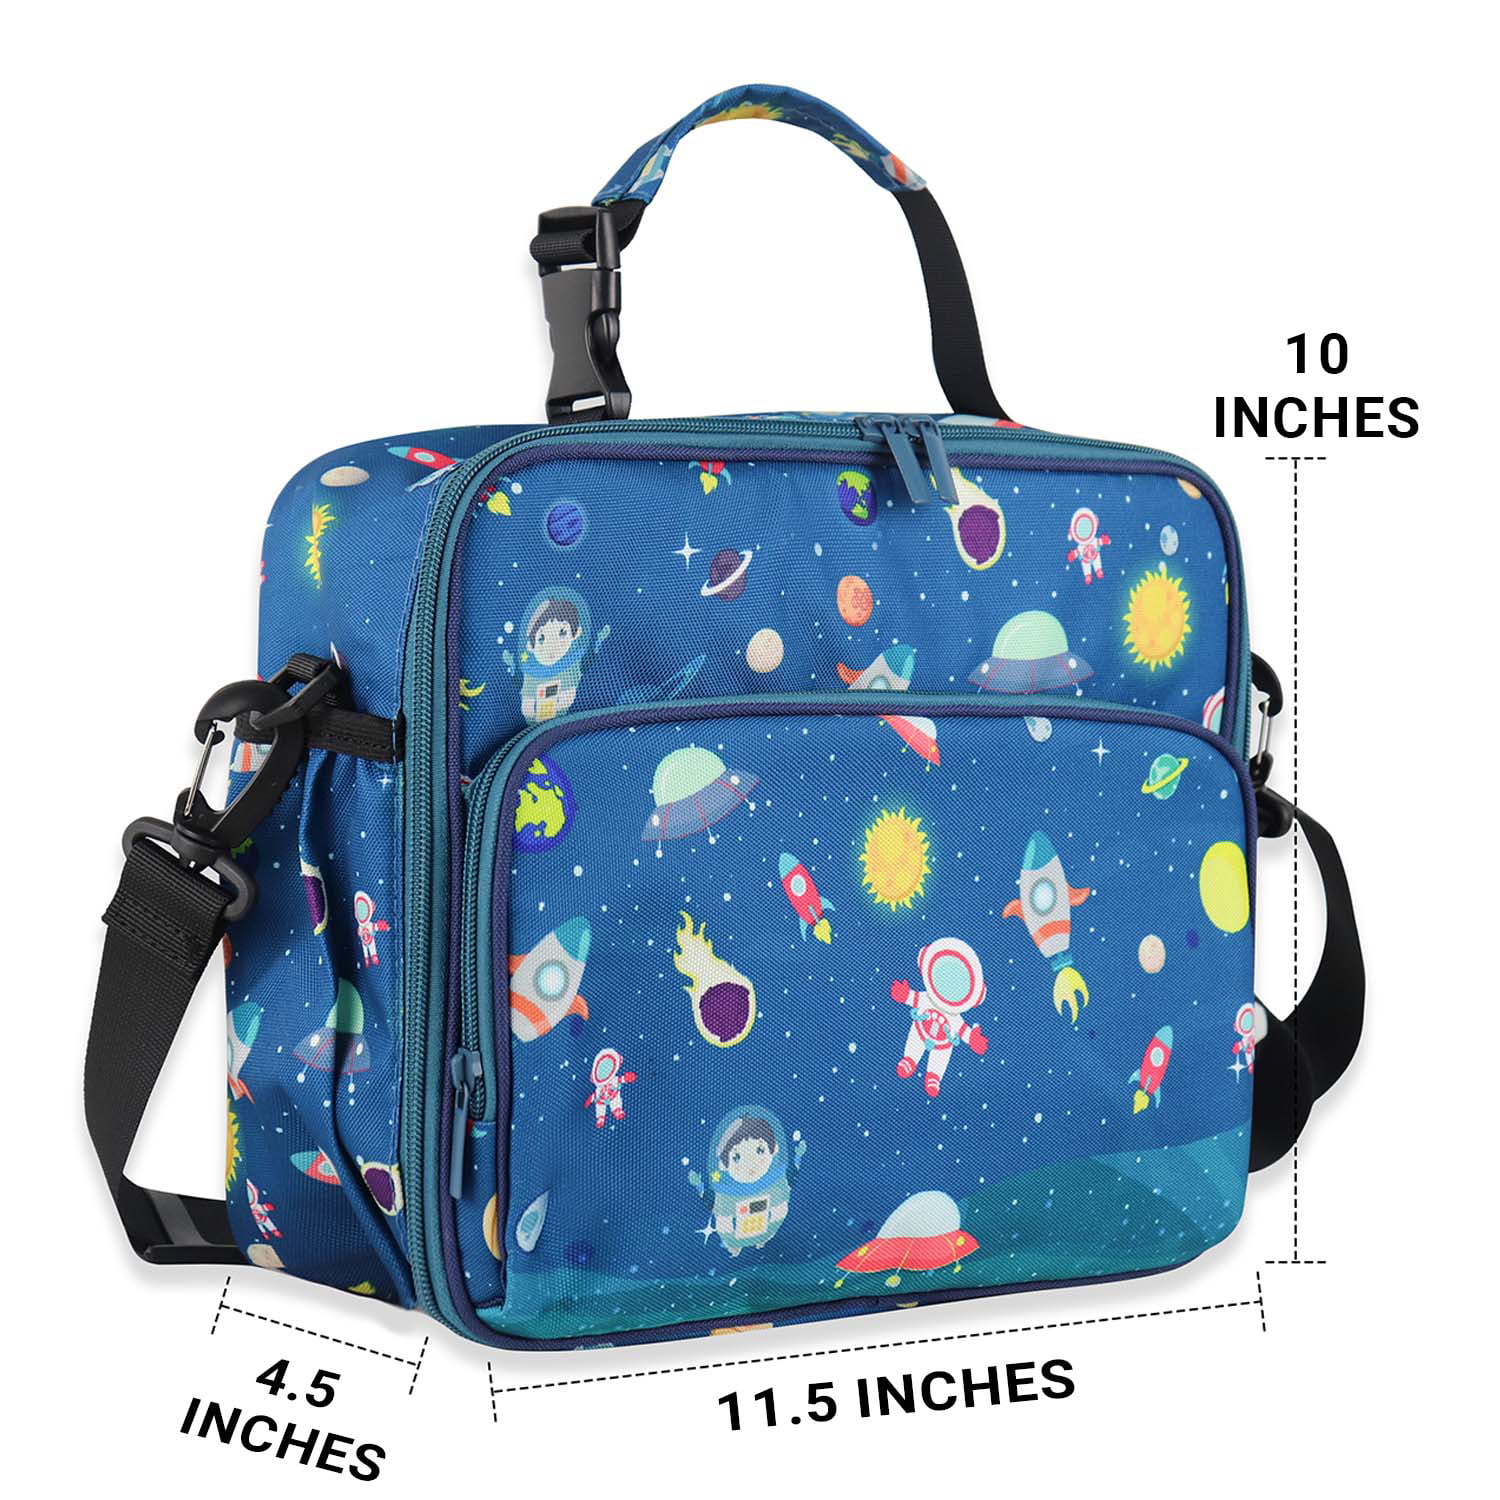 Lunch Bags Kids by Snack Attack Insulated Lunch Boxes Bag Girls Boys,  Stylish Food Grade Kids lunch boxes for Toddler Girls Boys School, Space  Rocket